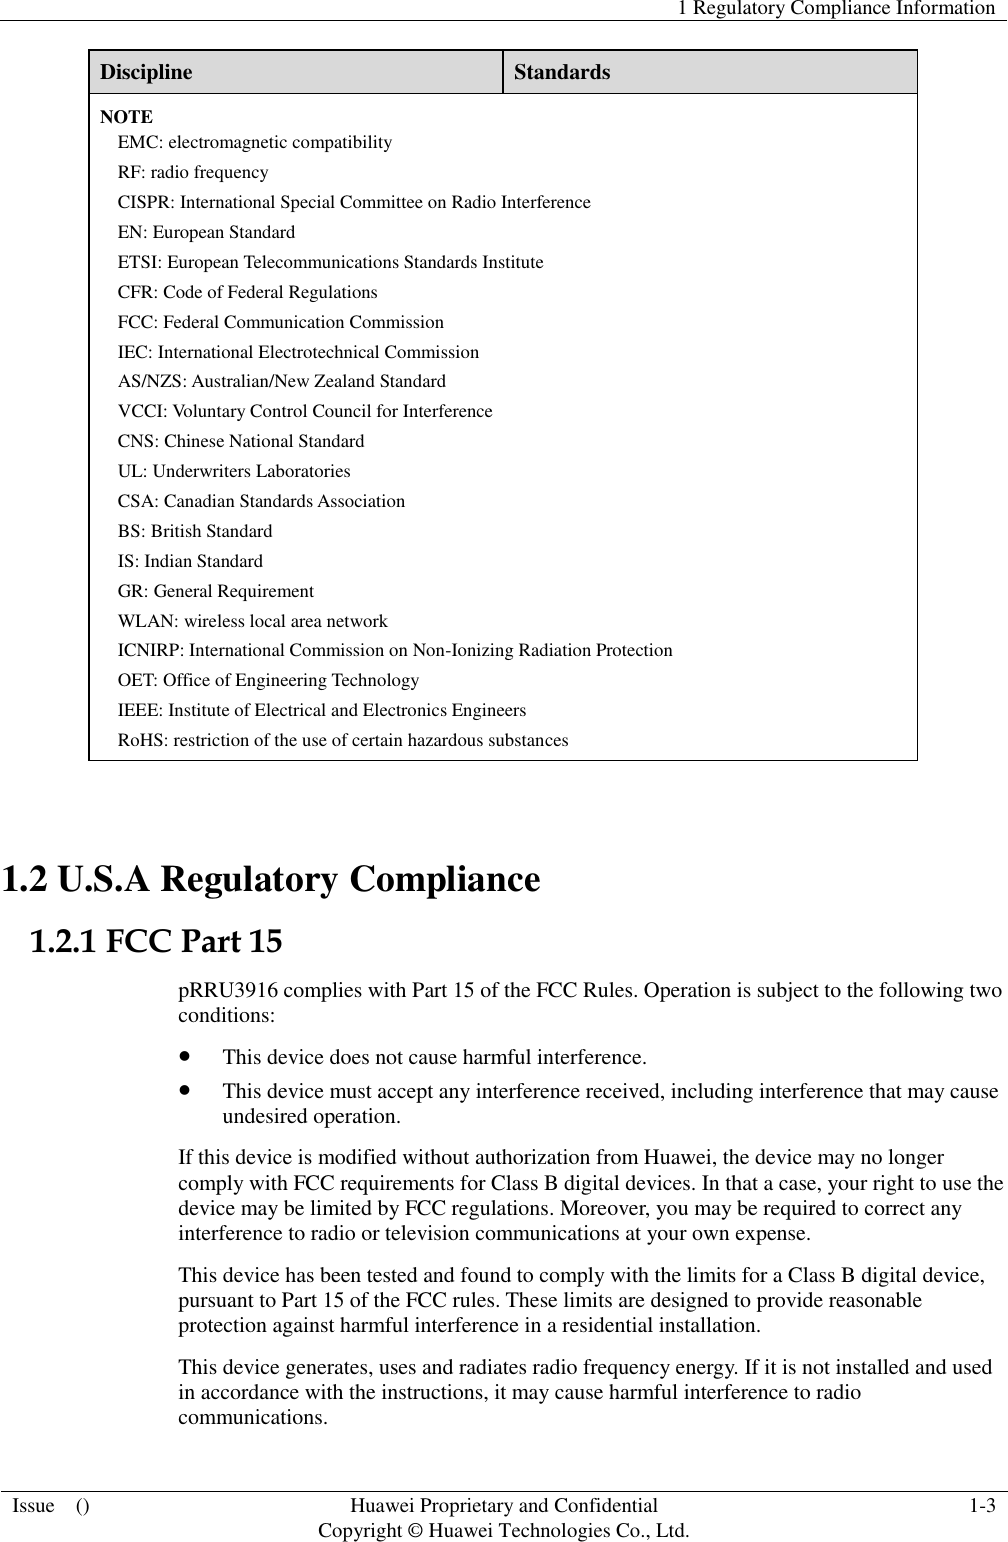   1 Regulatory Compliance Information  Issue    () Huawei Proprietary and Confidential                                     Copyright © Huawei Technologies Co., Ltd. 1-3  Discipline Standards NOTE EMC: electromagnetic compatibility RF: radio frequency CISPR: International Special Committee on Radio Interference EN: European Standard ETSI: European Telecommunications Standards Institute CFR: Code of Federal Regulations FCC: Federal Communication Commission IEC: International Electrotechnical Commission AS/NZS: Australian/New Zealand Standard VCCI: Voluntary Control Council for Interference CNS: Chinese National Standard UL: Underwriters Laboratories CSA: Canadian Standards Association BS: British Standard IS: Indian Standard GR: General Requirement WLAN: wireless local area network ICNIRP: International Commission on Non-Ionizing Radiation Protection OET: Office of Engineering Technology IEEE: Institute of Electrical and Electronics Engineers RoHS: restriction of the use of certain hazardous substances  1.2 U.S.A Regulatory Compliance 1.2.1 FCC Part 15 pRRU3916 complies with Part 15 of the FCC Rules. Operation is subject to the following two conditions:  This device does not cause harmful interference.  This device must accept any interference received, including interference that may cause undesired operation. If this device is modified without authorization from Huawei, the device may no longer comply with FCC requirements for Class B digital devices. In that a case, your right to use the device may be limited by FCC regulations. Moreover, you may be required to correct any interference to radio or television communications at your own expense. This device has been tested and found to comply with the limits for a Class B digital device, pursuant to Part 15 of the FCC rules. These limits are designed to provide reasonable protection against harmful interference in a residential installation. This device generates, uses and radiates radio frequency energy. If it is not installed and used in accordance with the instructions, it may cause harmful interference to radio communications. 